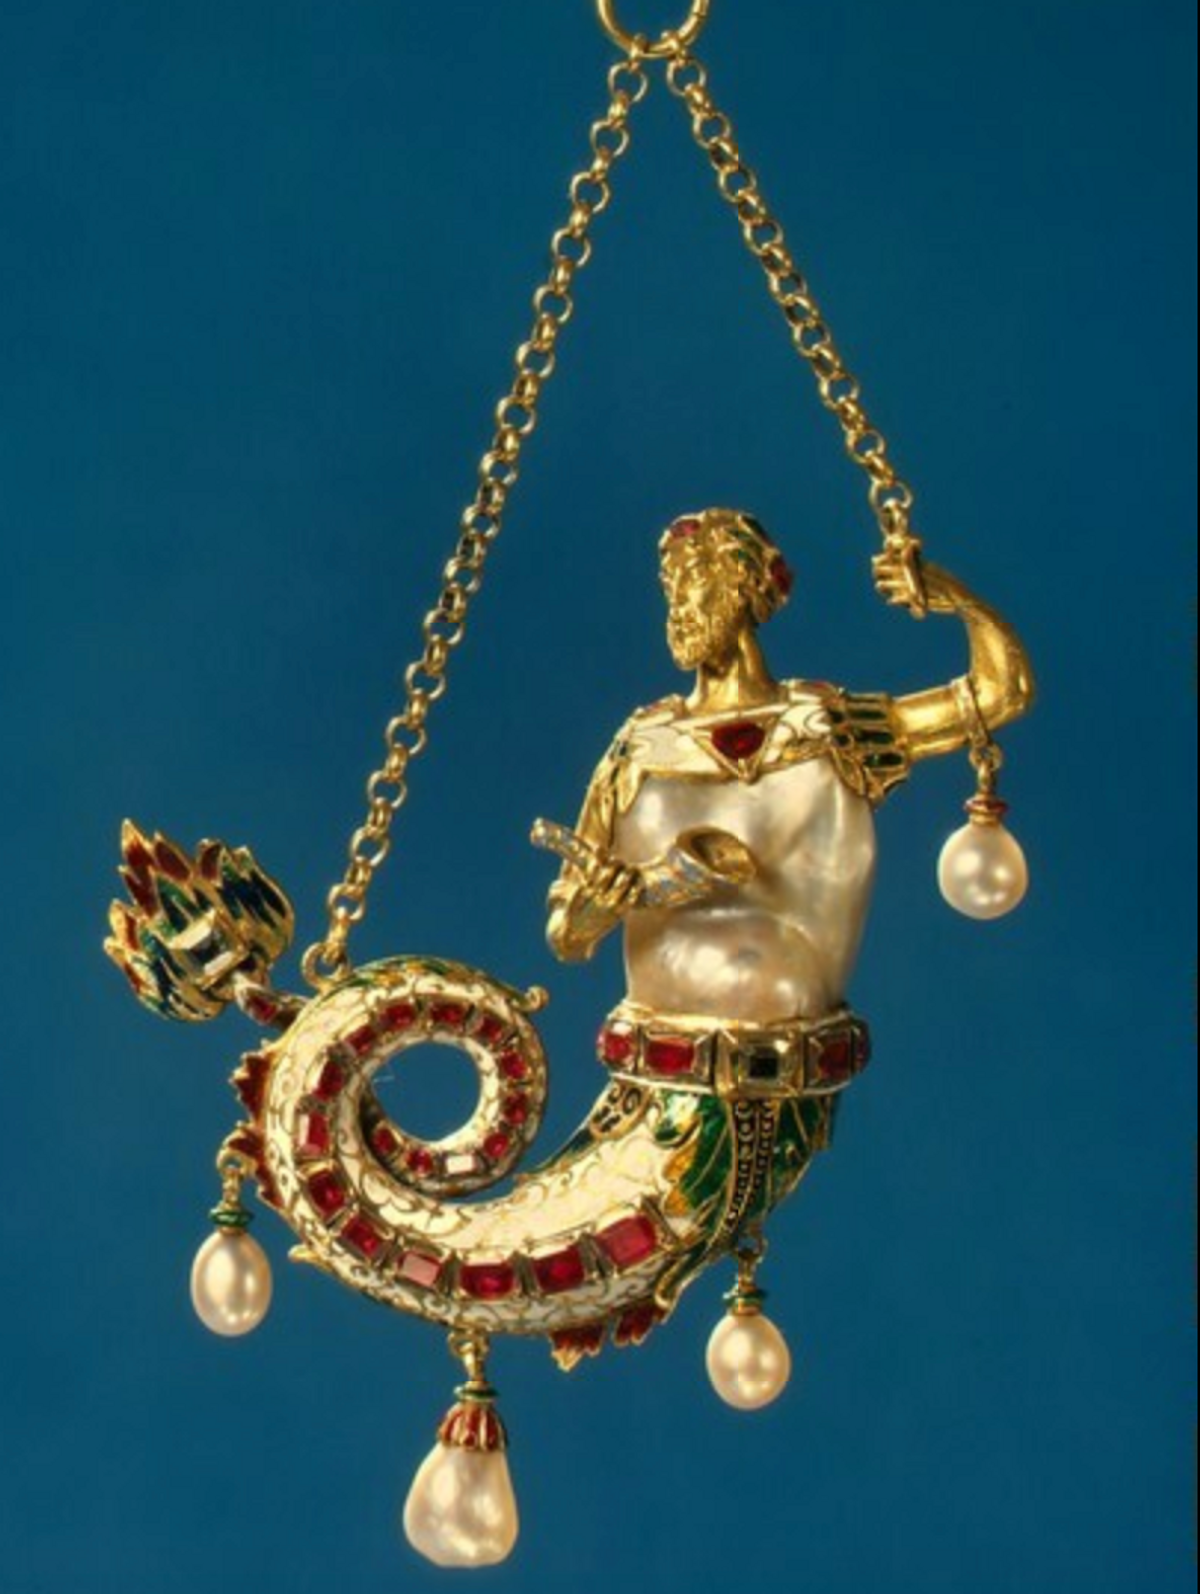 Alfred André, Pendant with a Triton, 1885/1890 Widener Collection, The National Gallery of Art